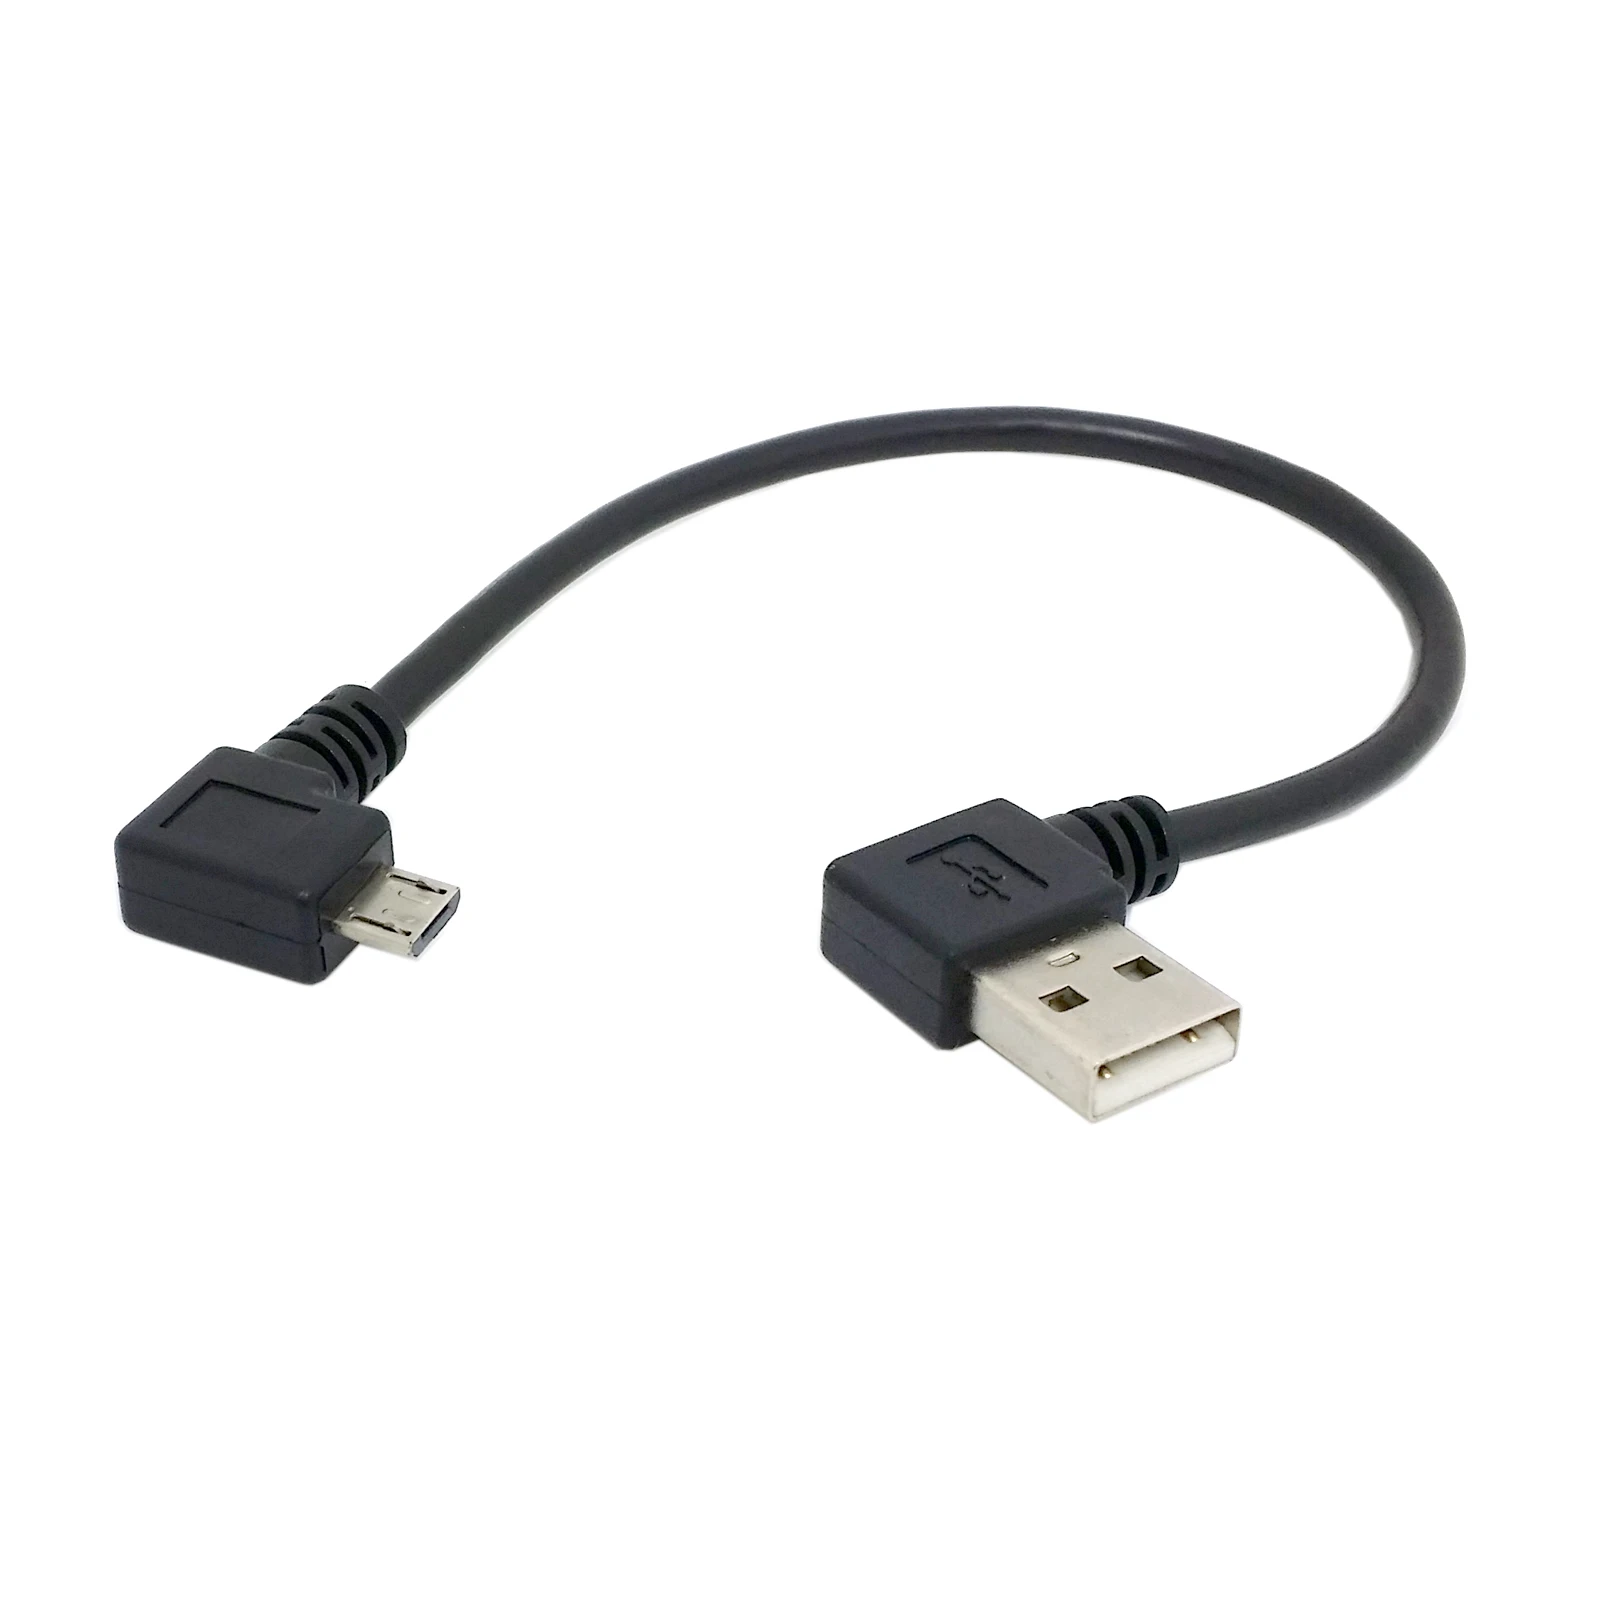 

Xiwai Left Angled 90 Degree Micro USB Male to USB Left Angled Data Charged Cable 20cm